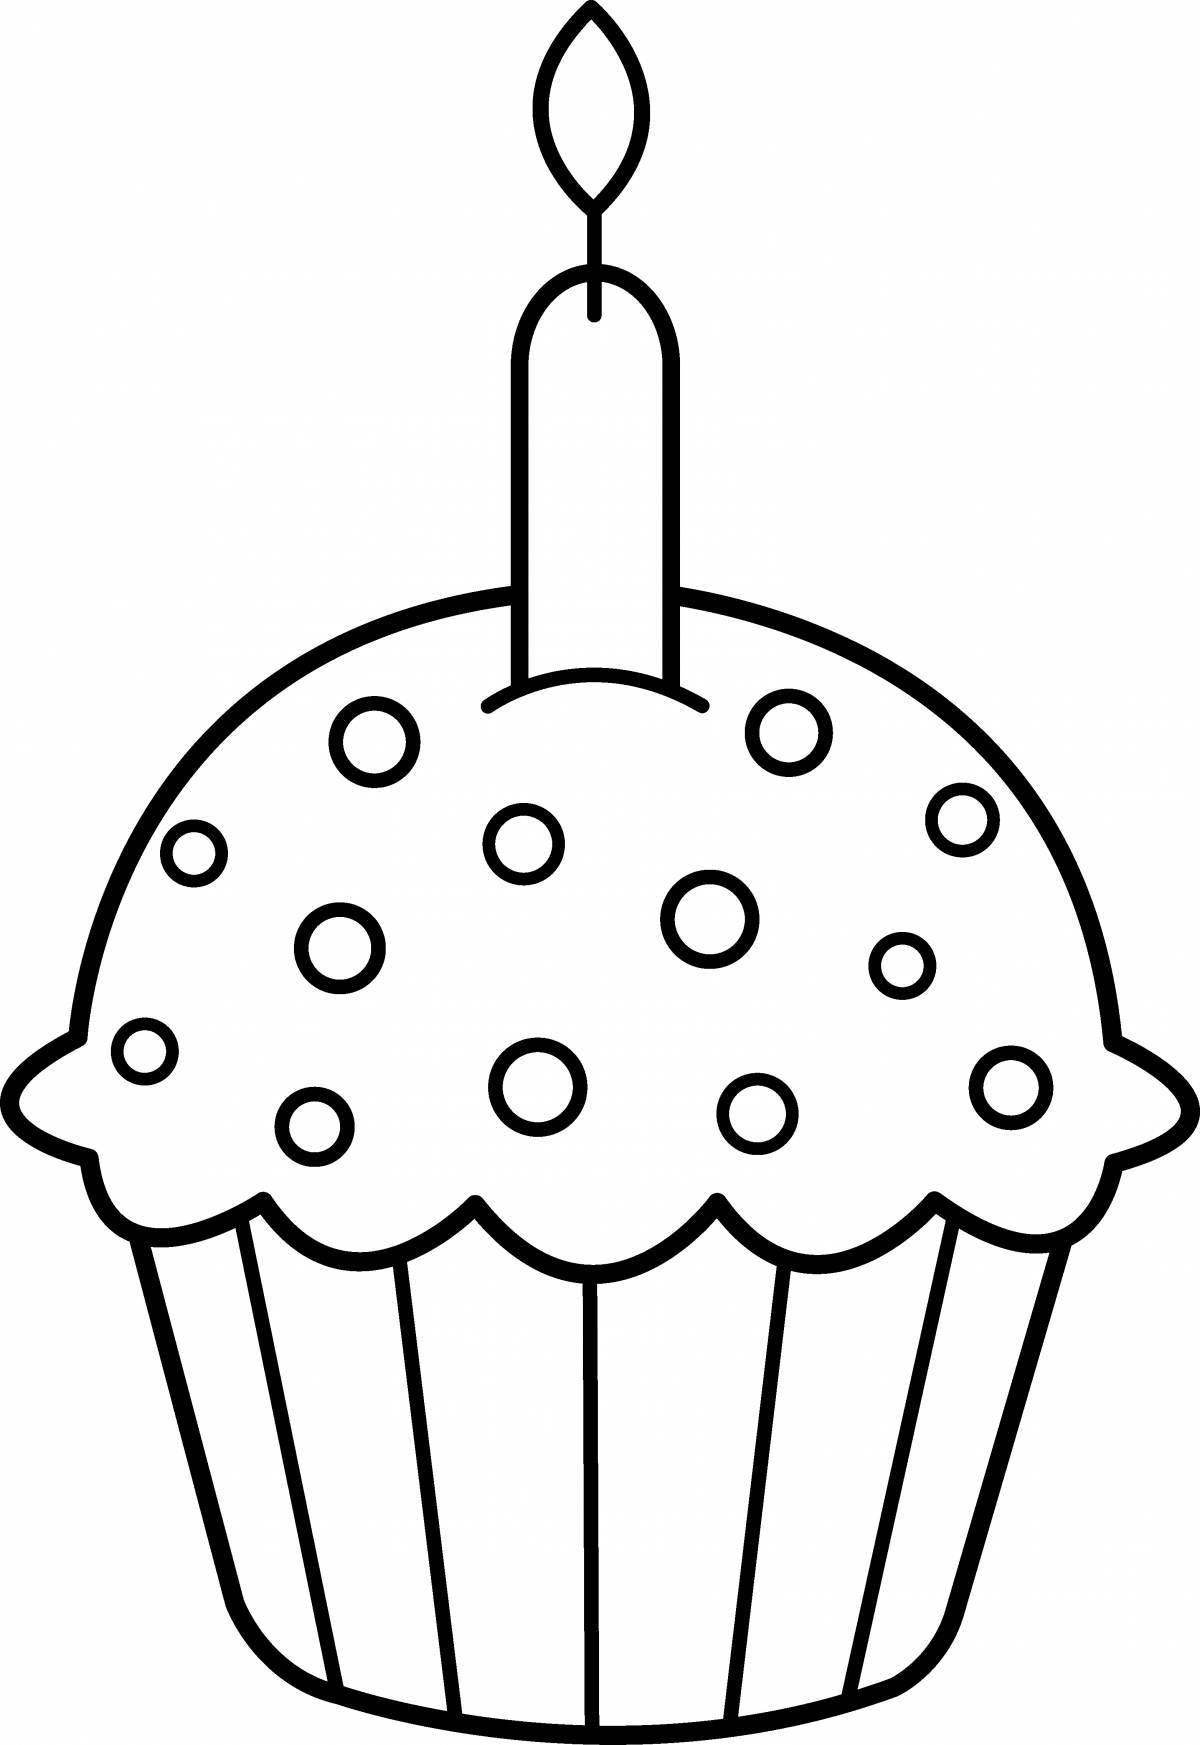 Coloring cupcakes for kids